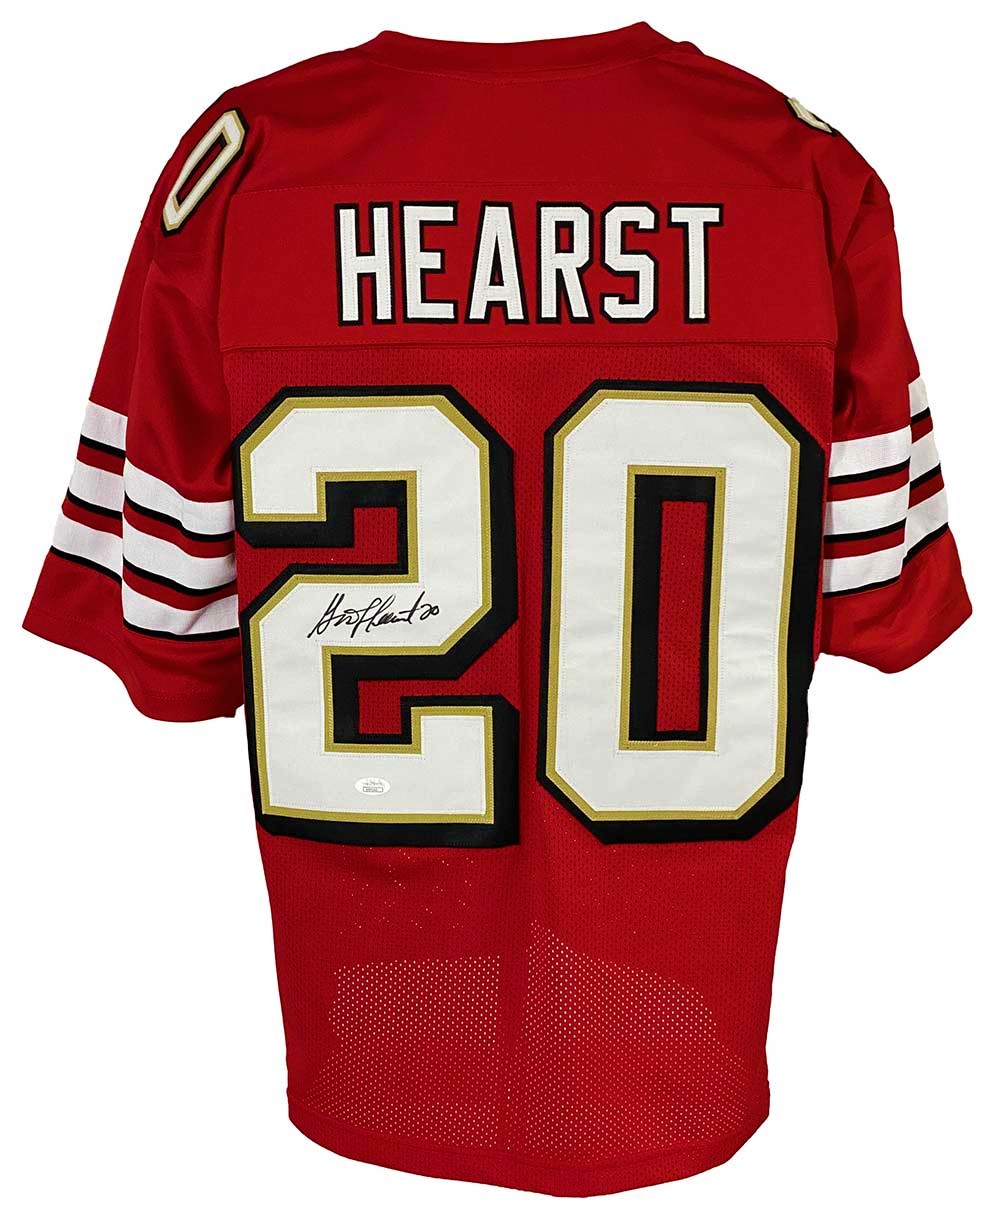 49Ers Jersey - Men's San Francisco 49ers Justin Smith Nike Scarlet Team ... / 1 in the nfl, but ...